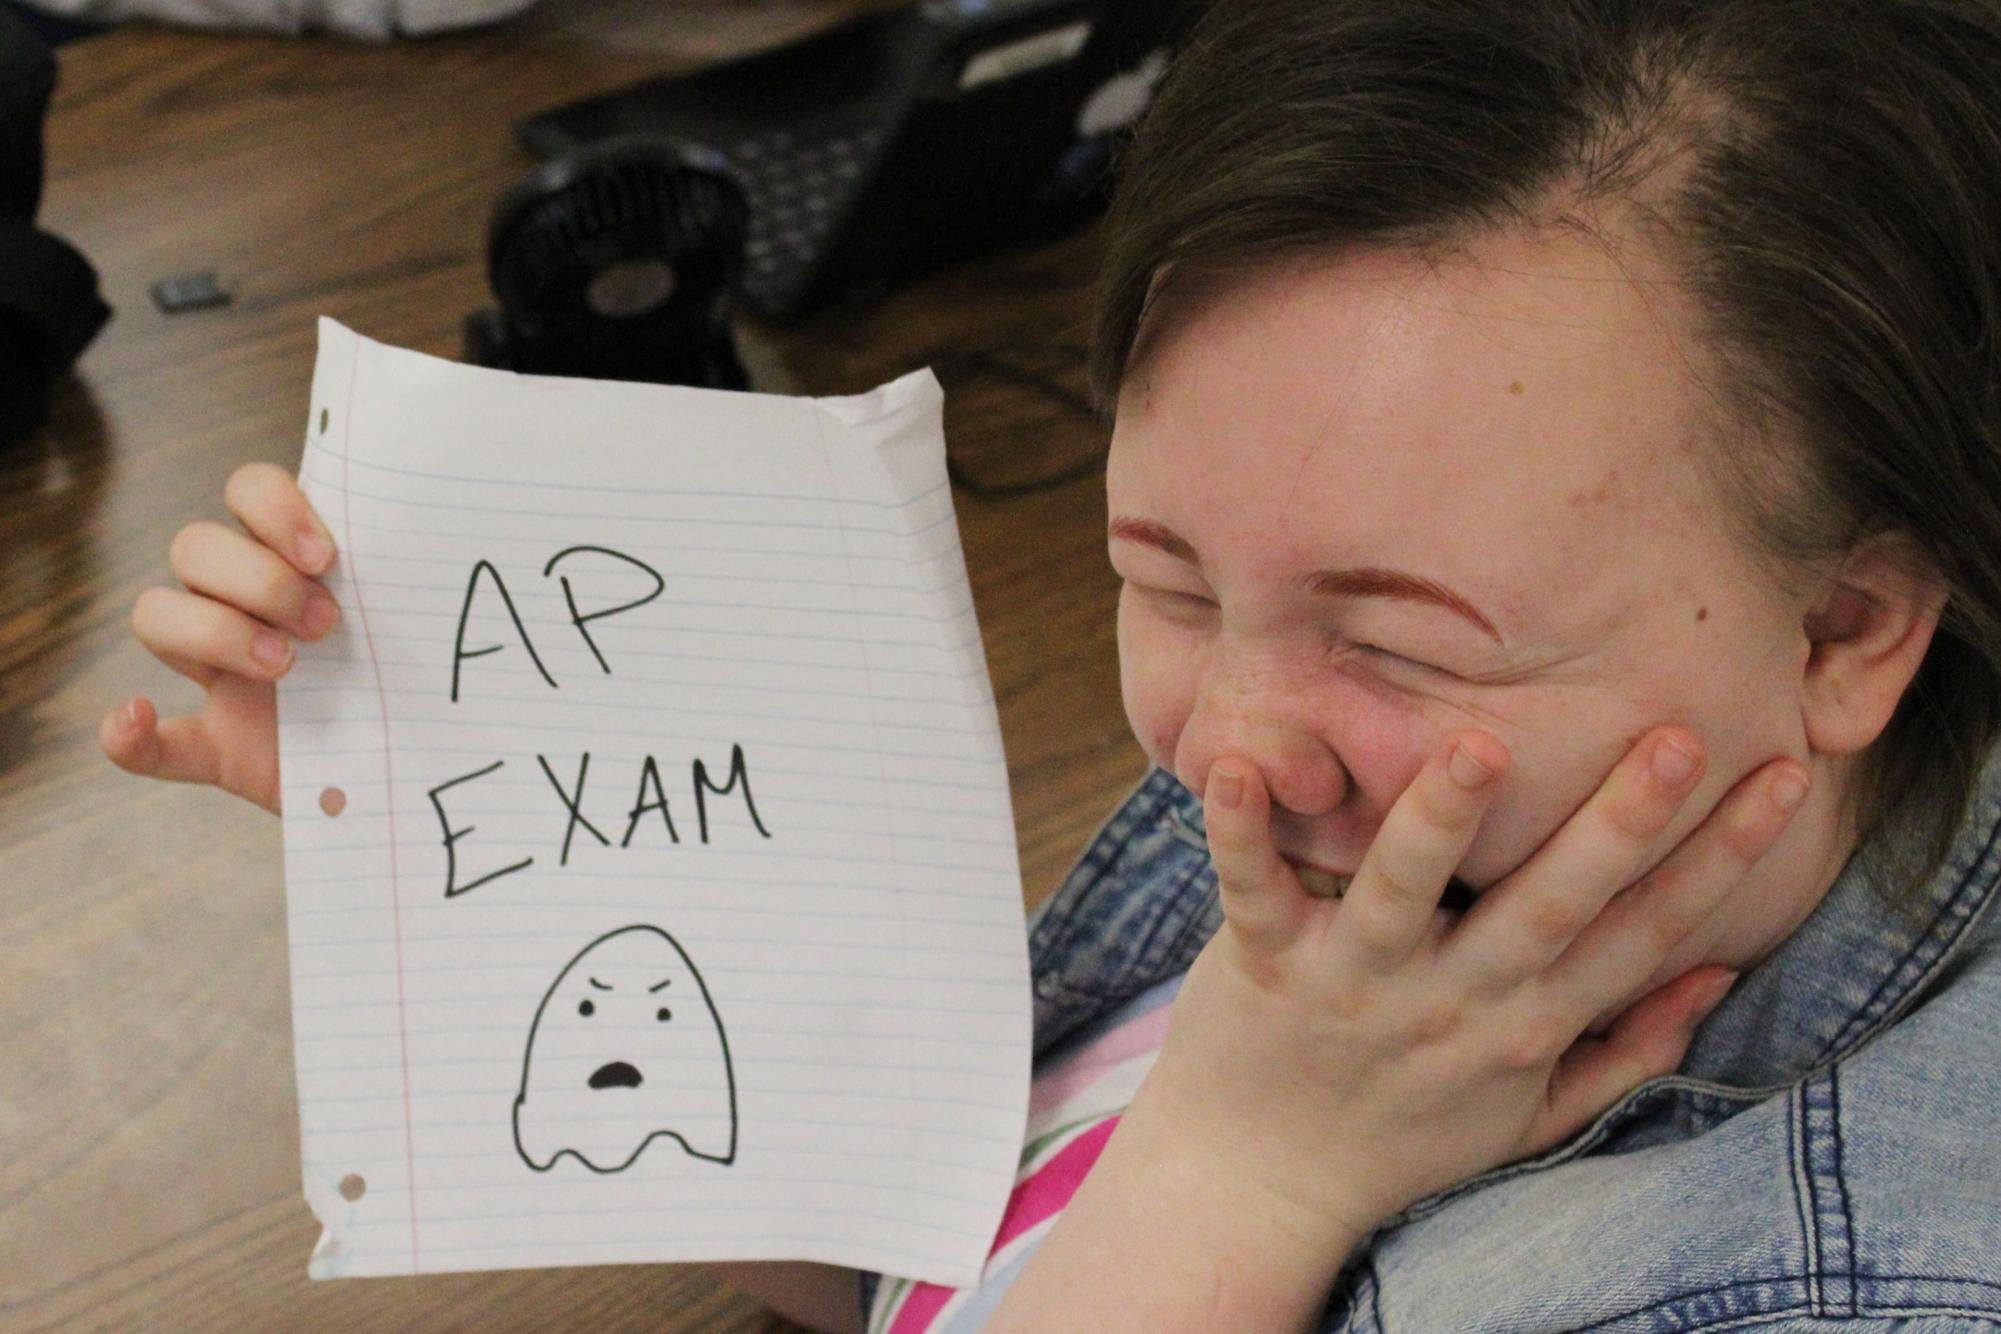 Screaming in fear of an AP exam, sophomore Veda Fagner embodies the minds of many juniors and seniors taking one of the many AP exams.